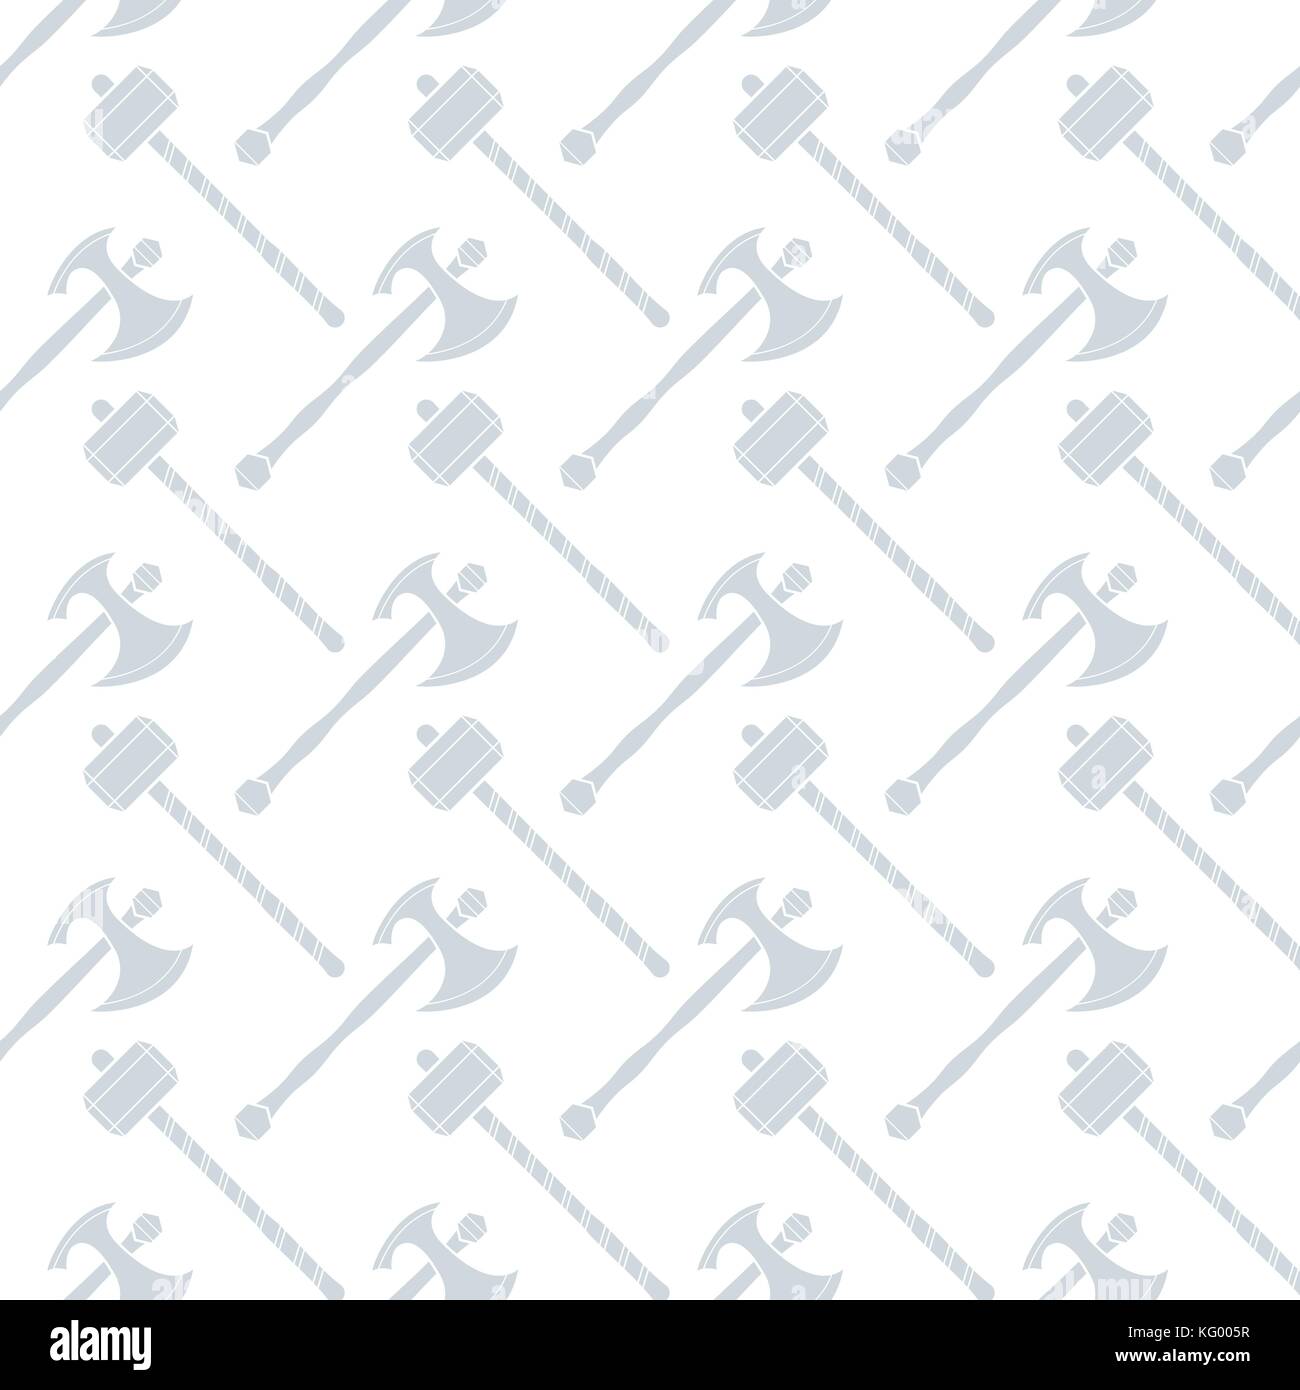 vector light grey solid design battle hammer axe medieval cold steel arms seamless pattern isolated on white background Stock Vector